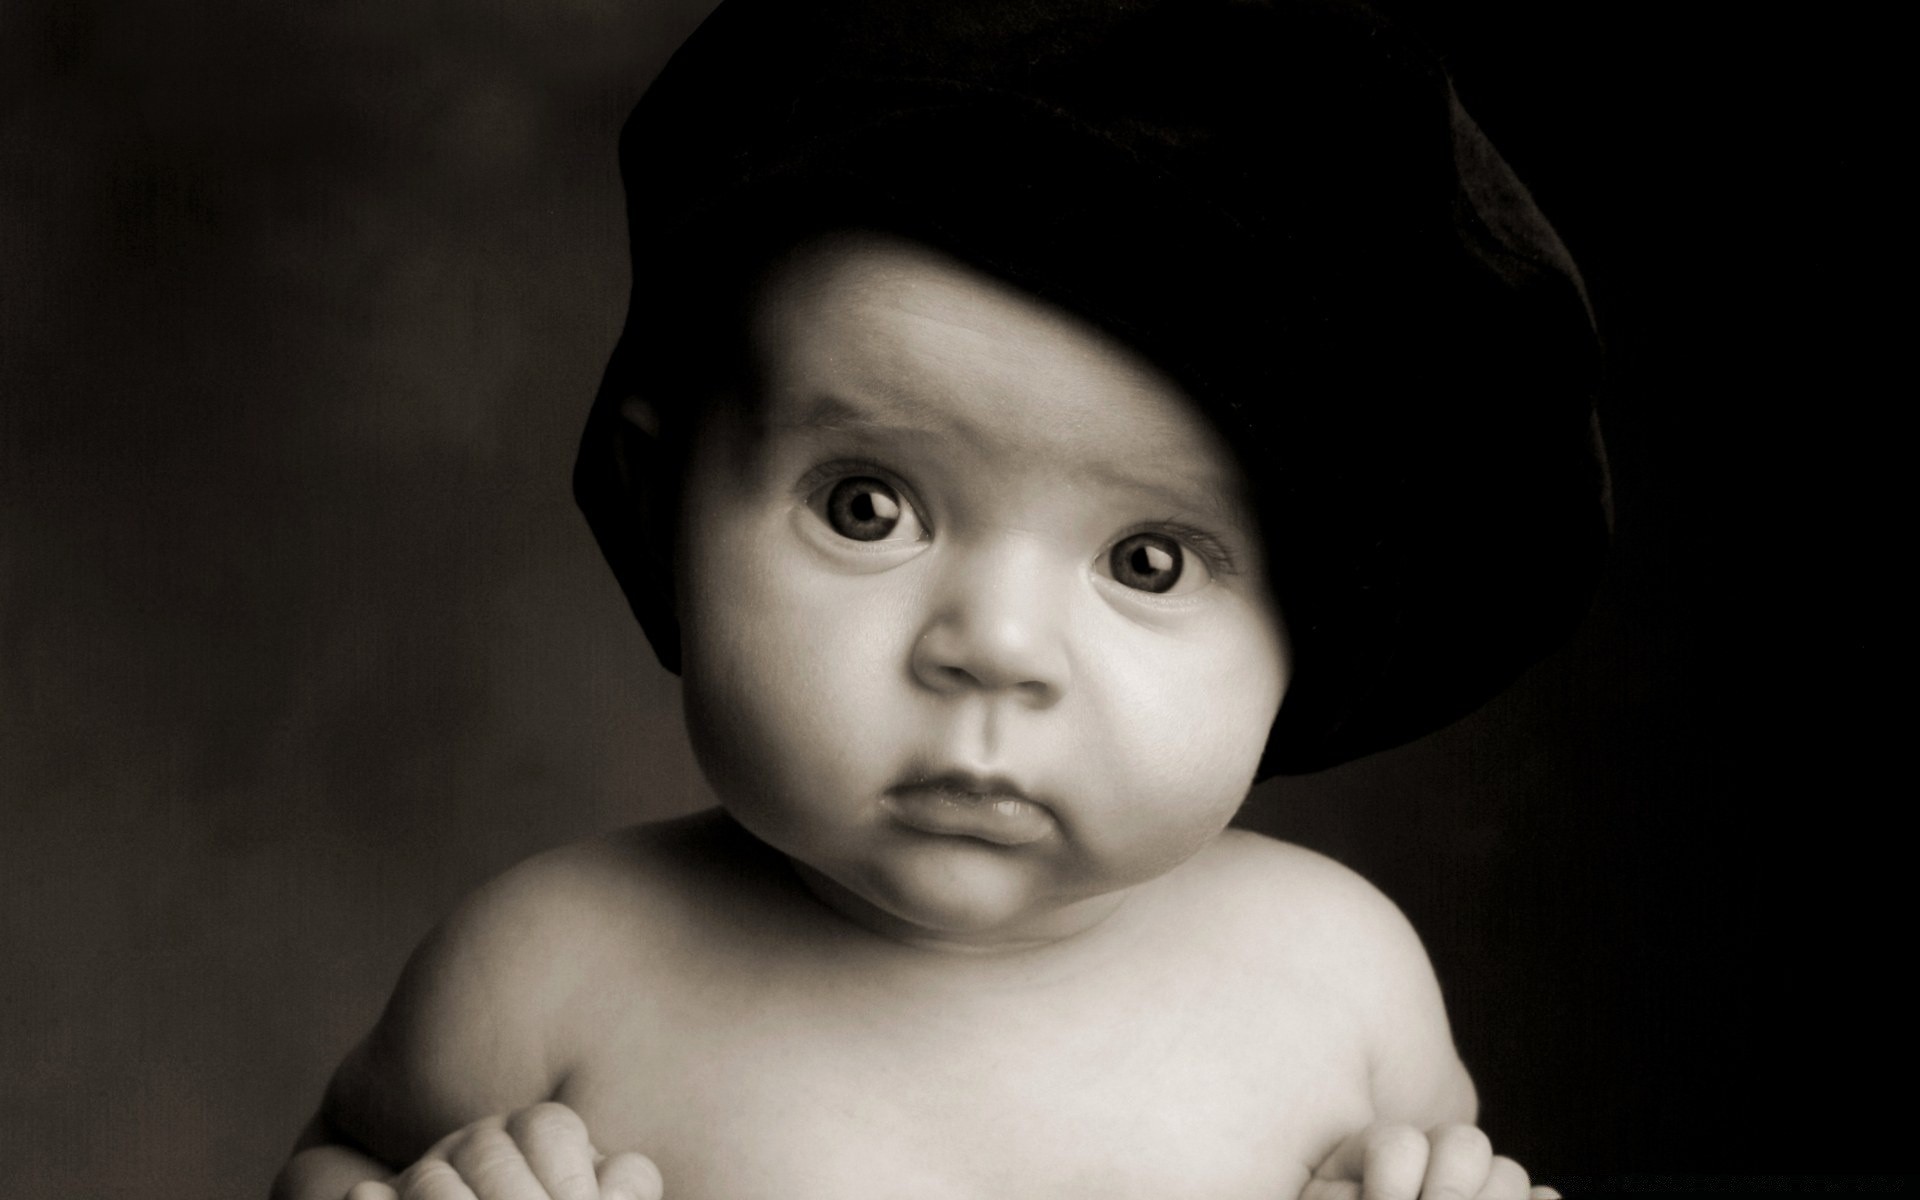 children portrait baby monochrome boy child one nude girl newborn face sepia black and white facial expression eye cute